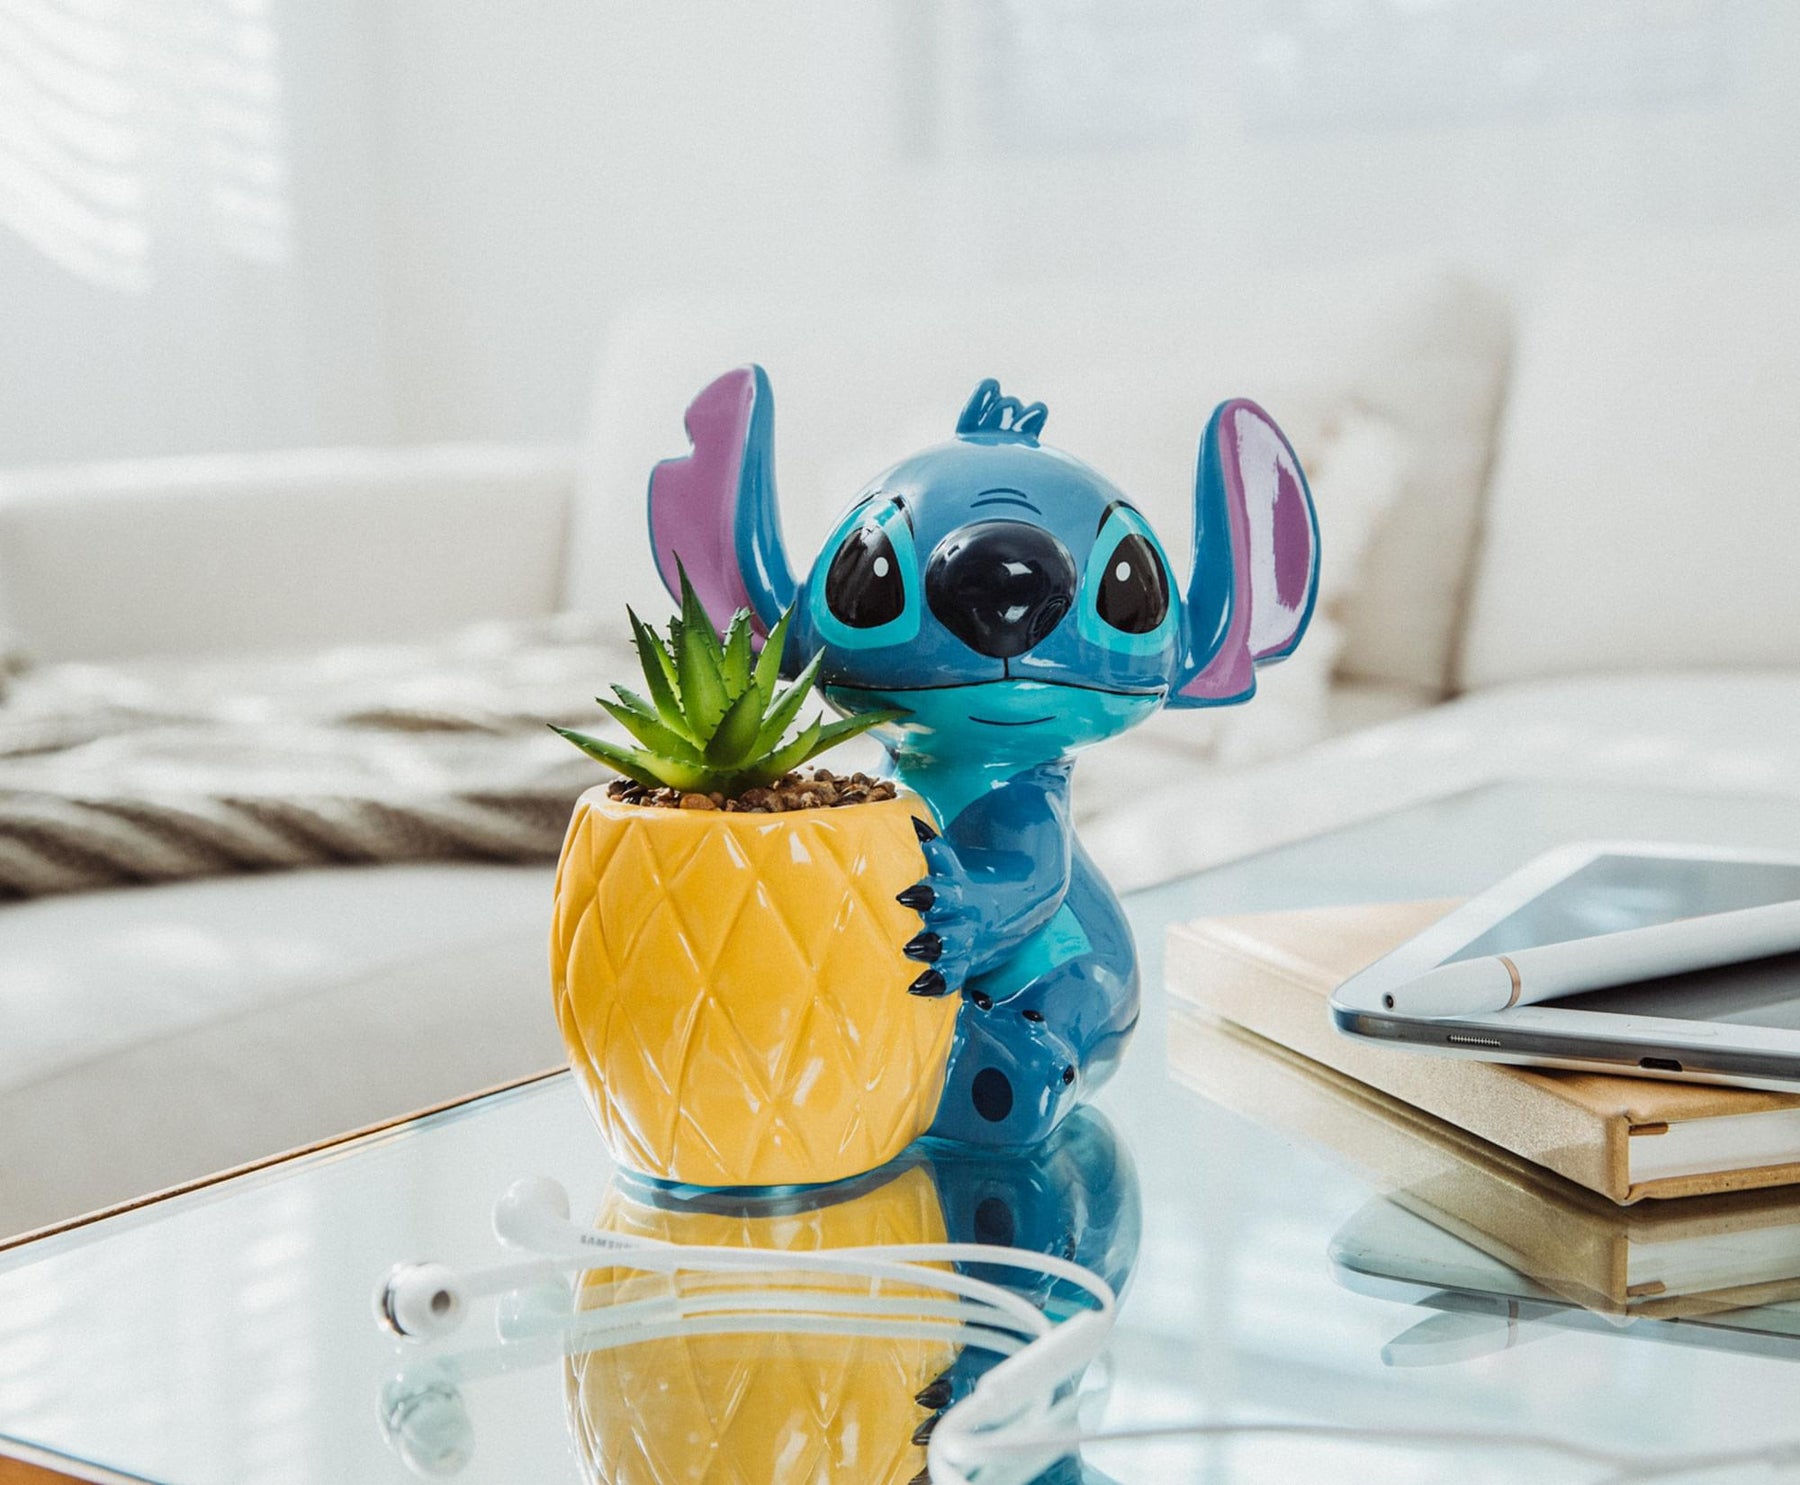 Disney Lilo & Stitch Pineapple 6-Inch Planter With Artificial Succulent